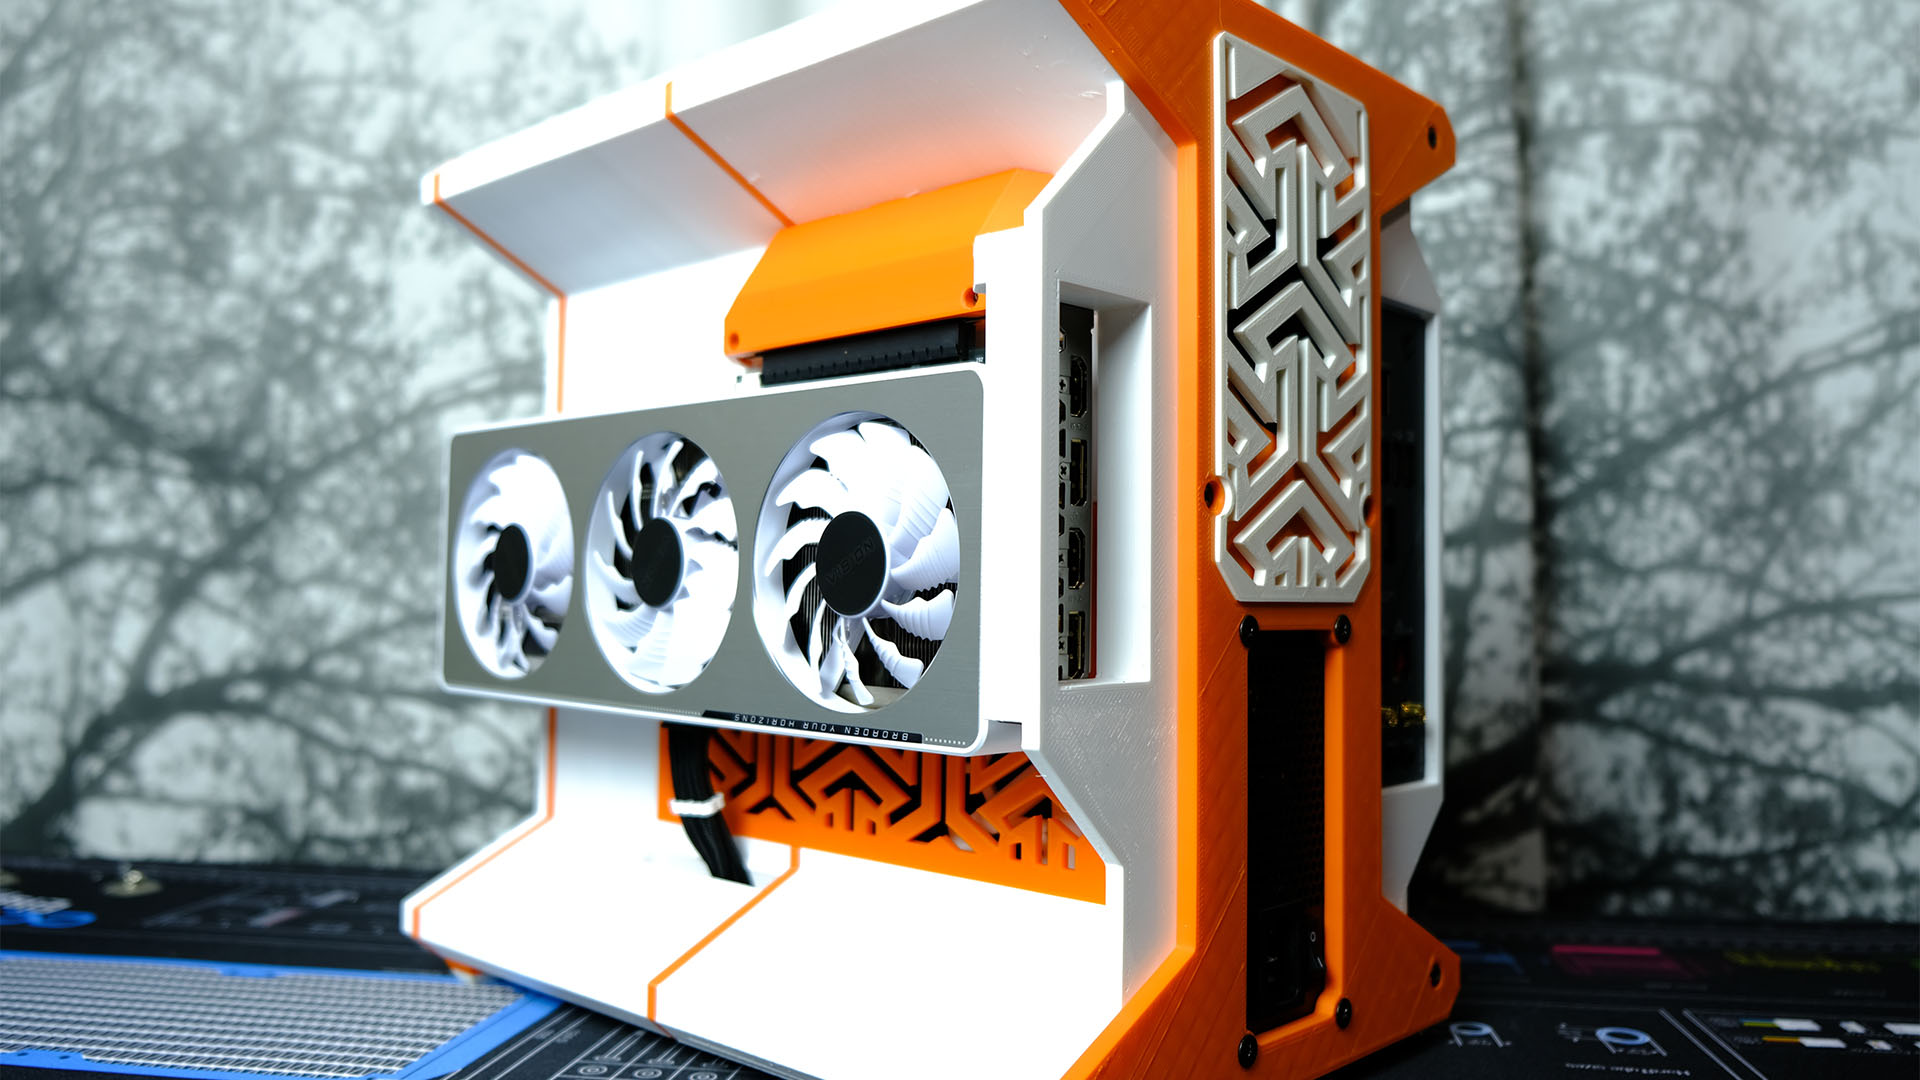 This outstanding orange and white PC case was completely 3D printed